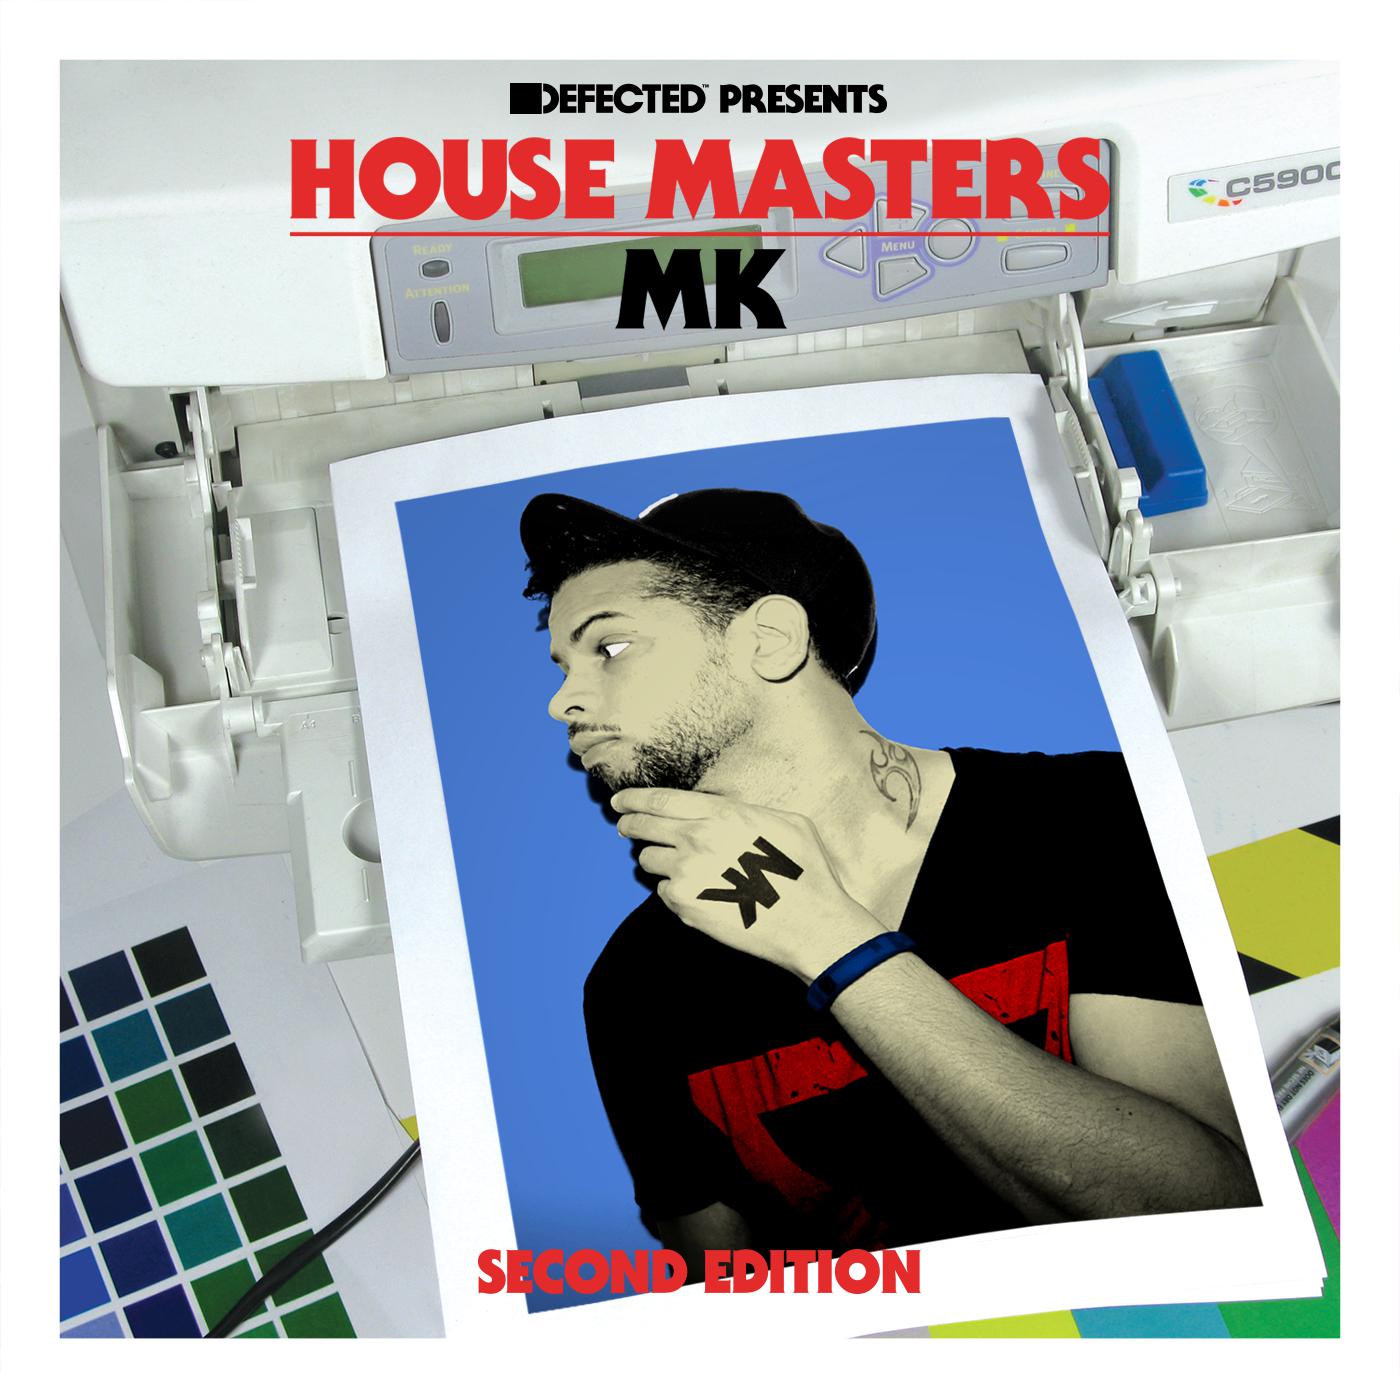 Defected Presents House Masters - MK (Second Edition)